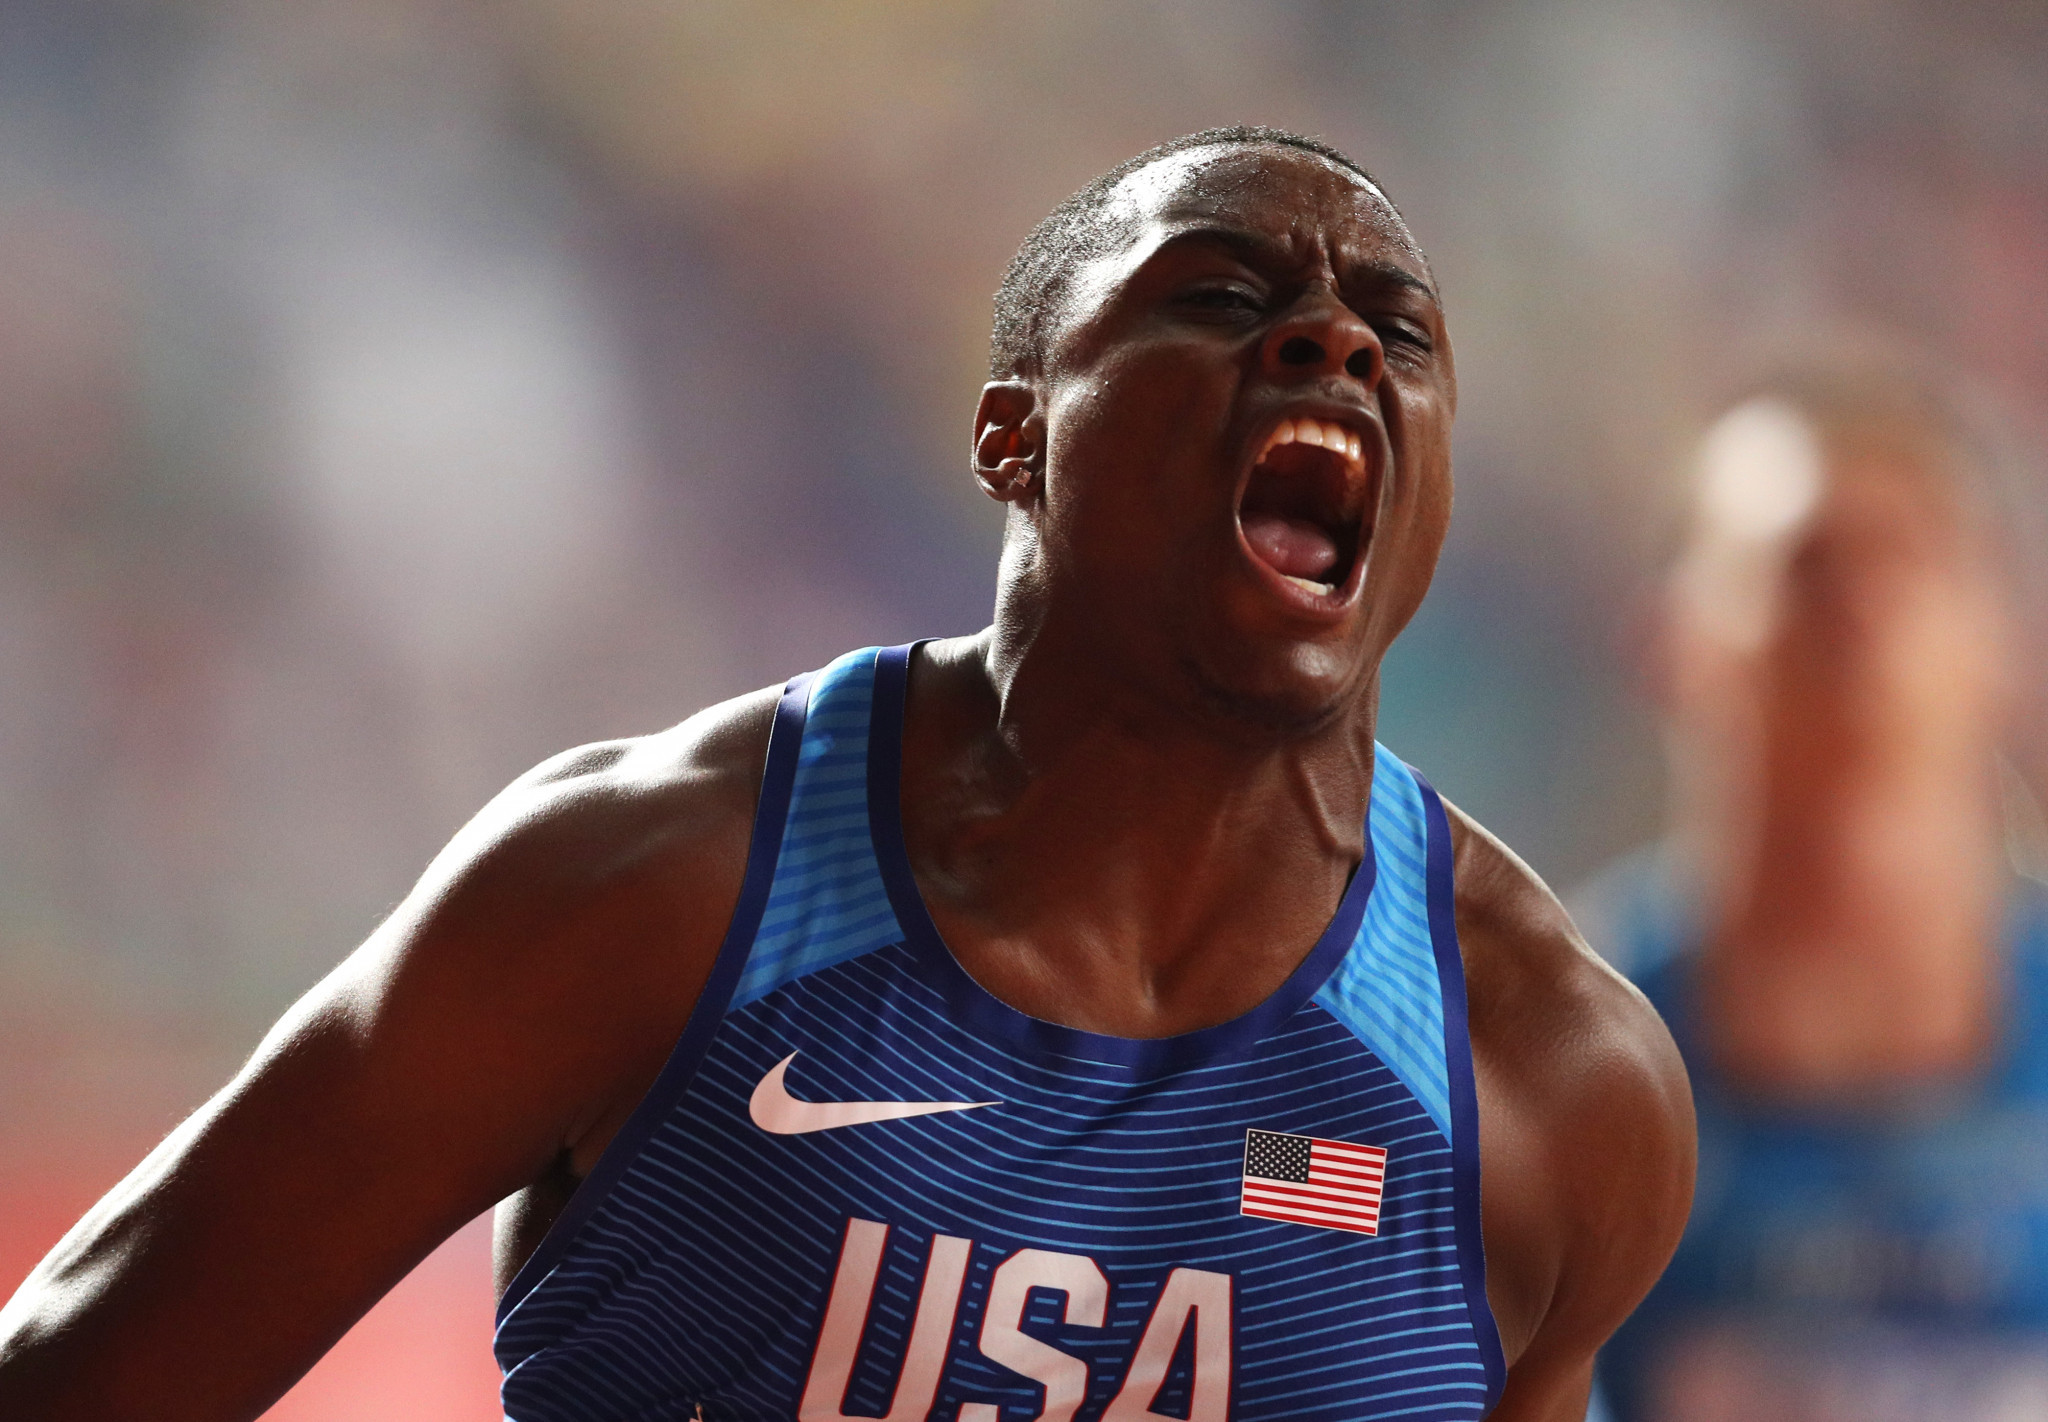 Christian Coleman faces a two-year ban for missing three anti-doping tests in a year ©Getty Images